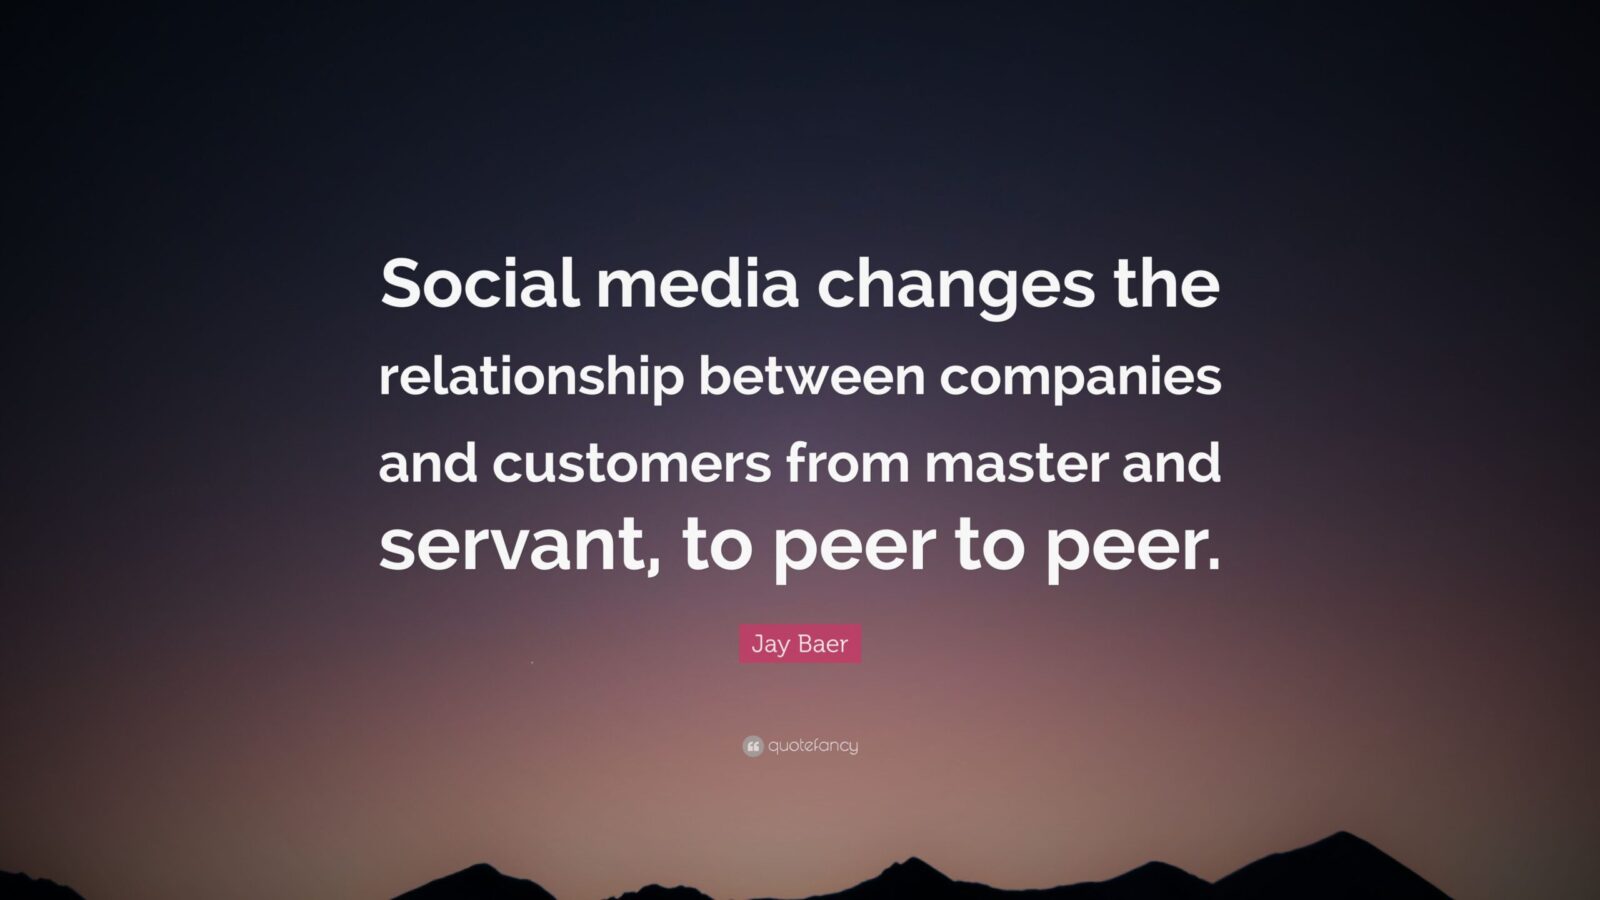 Social media changes the relationship between companies